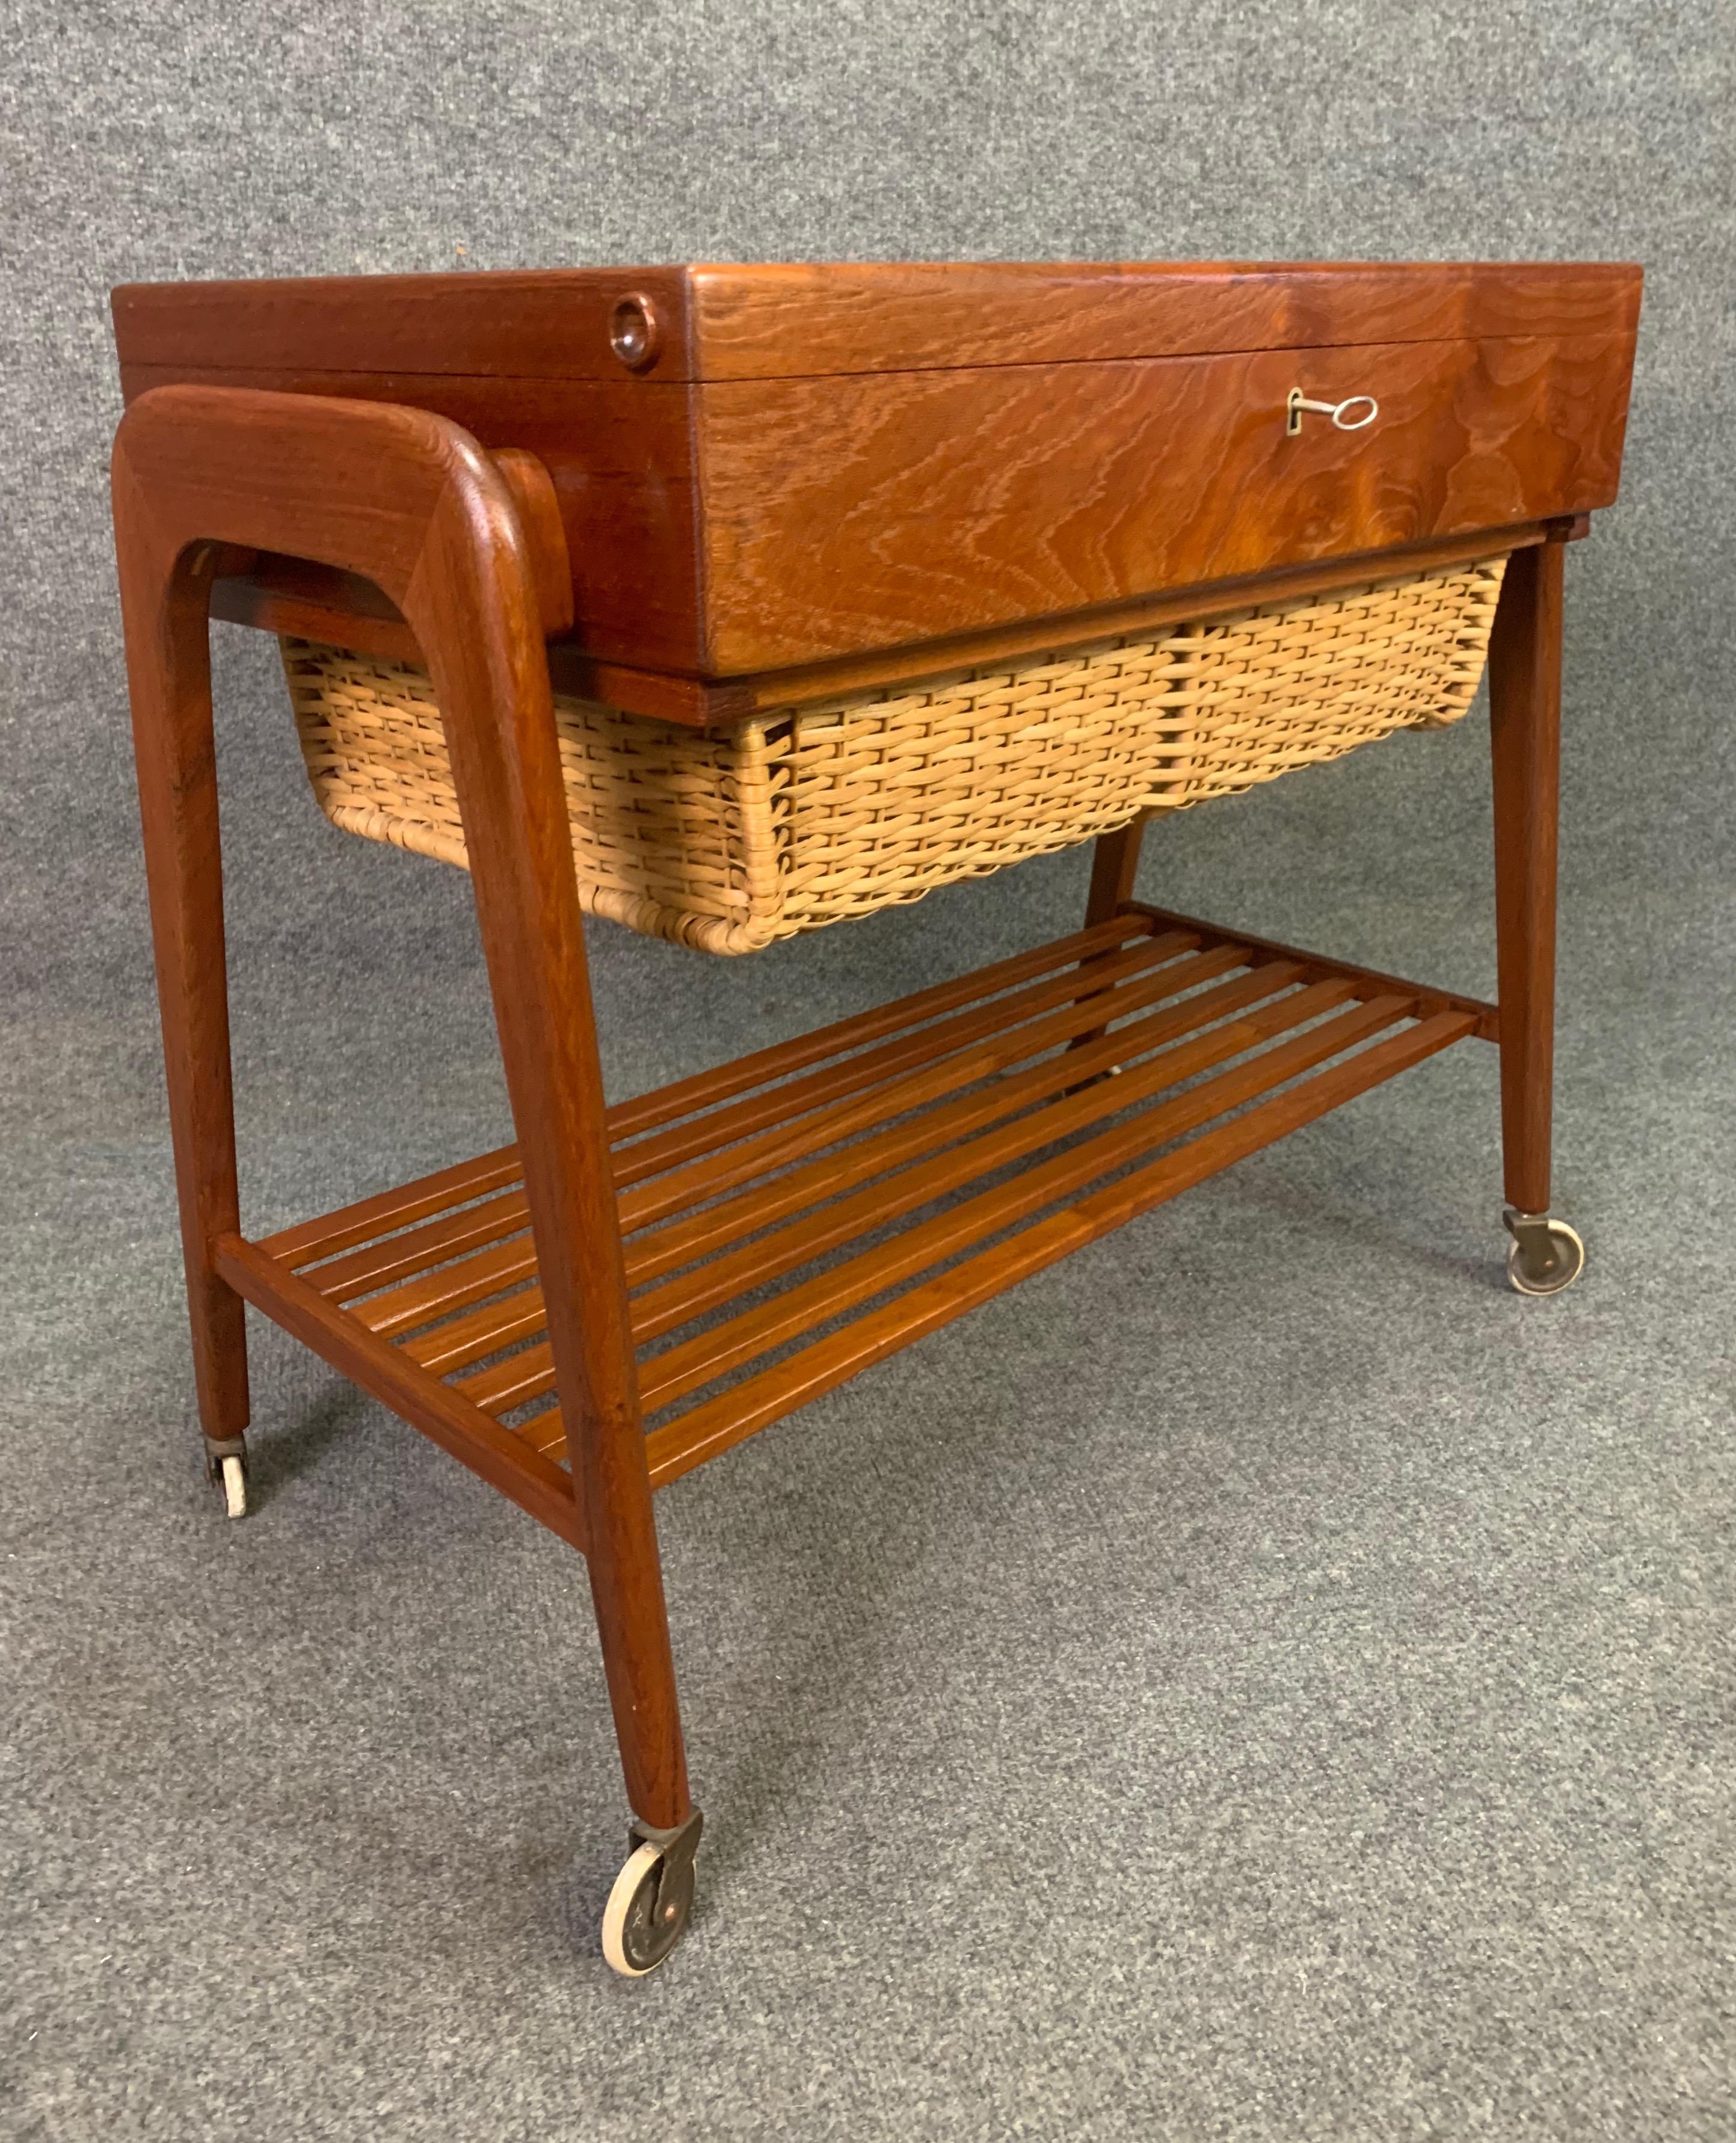 Mid-20th Century Danish Mid-Century Modern Teak Trolley, Sewing Table by Poul Dinesen